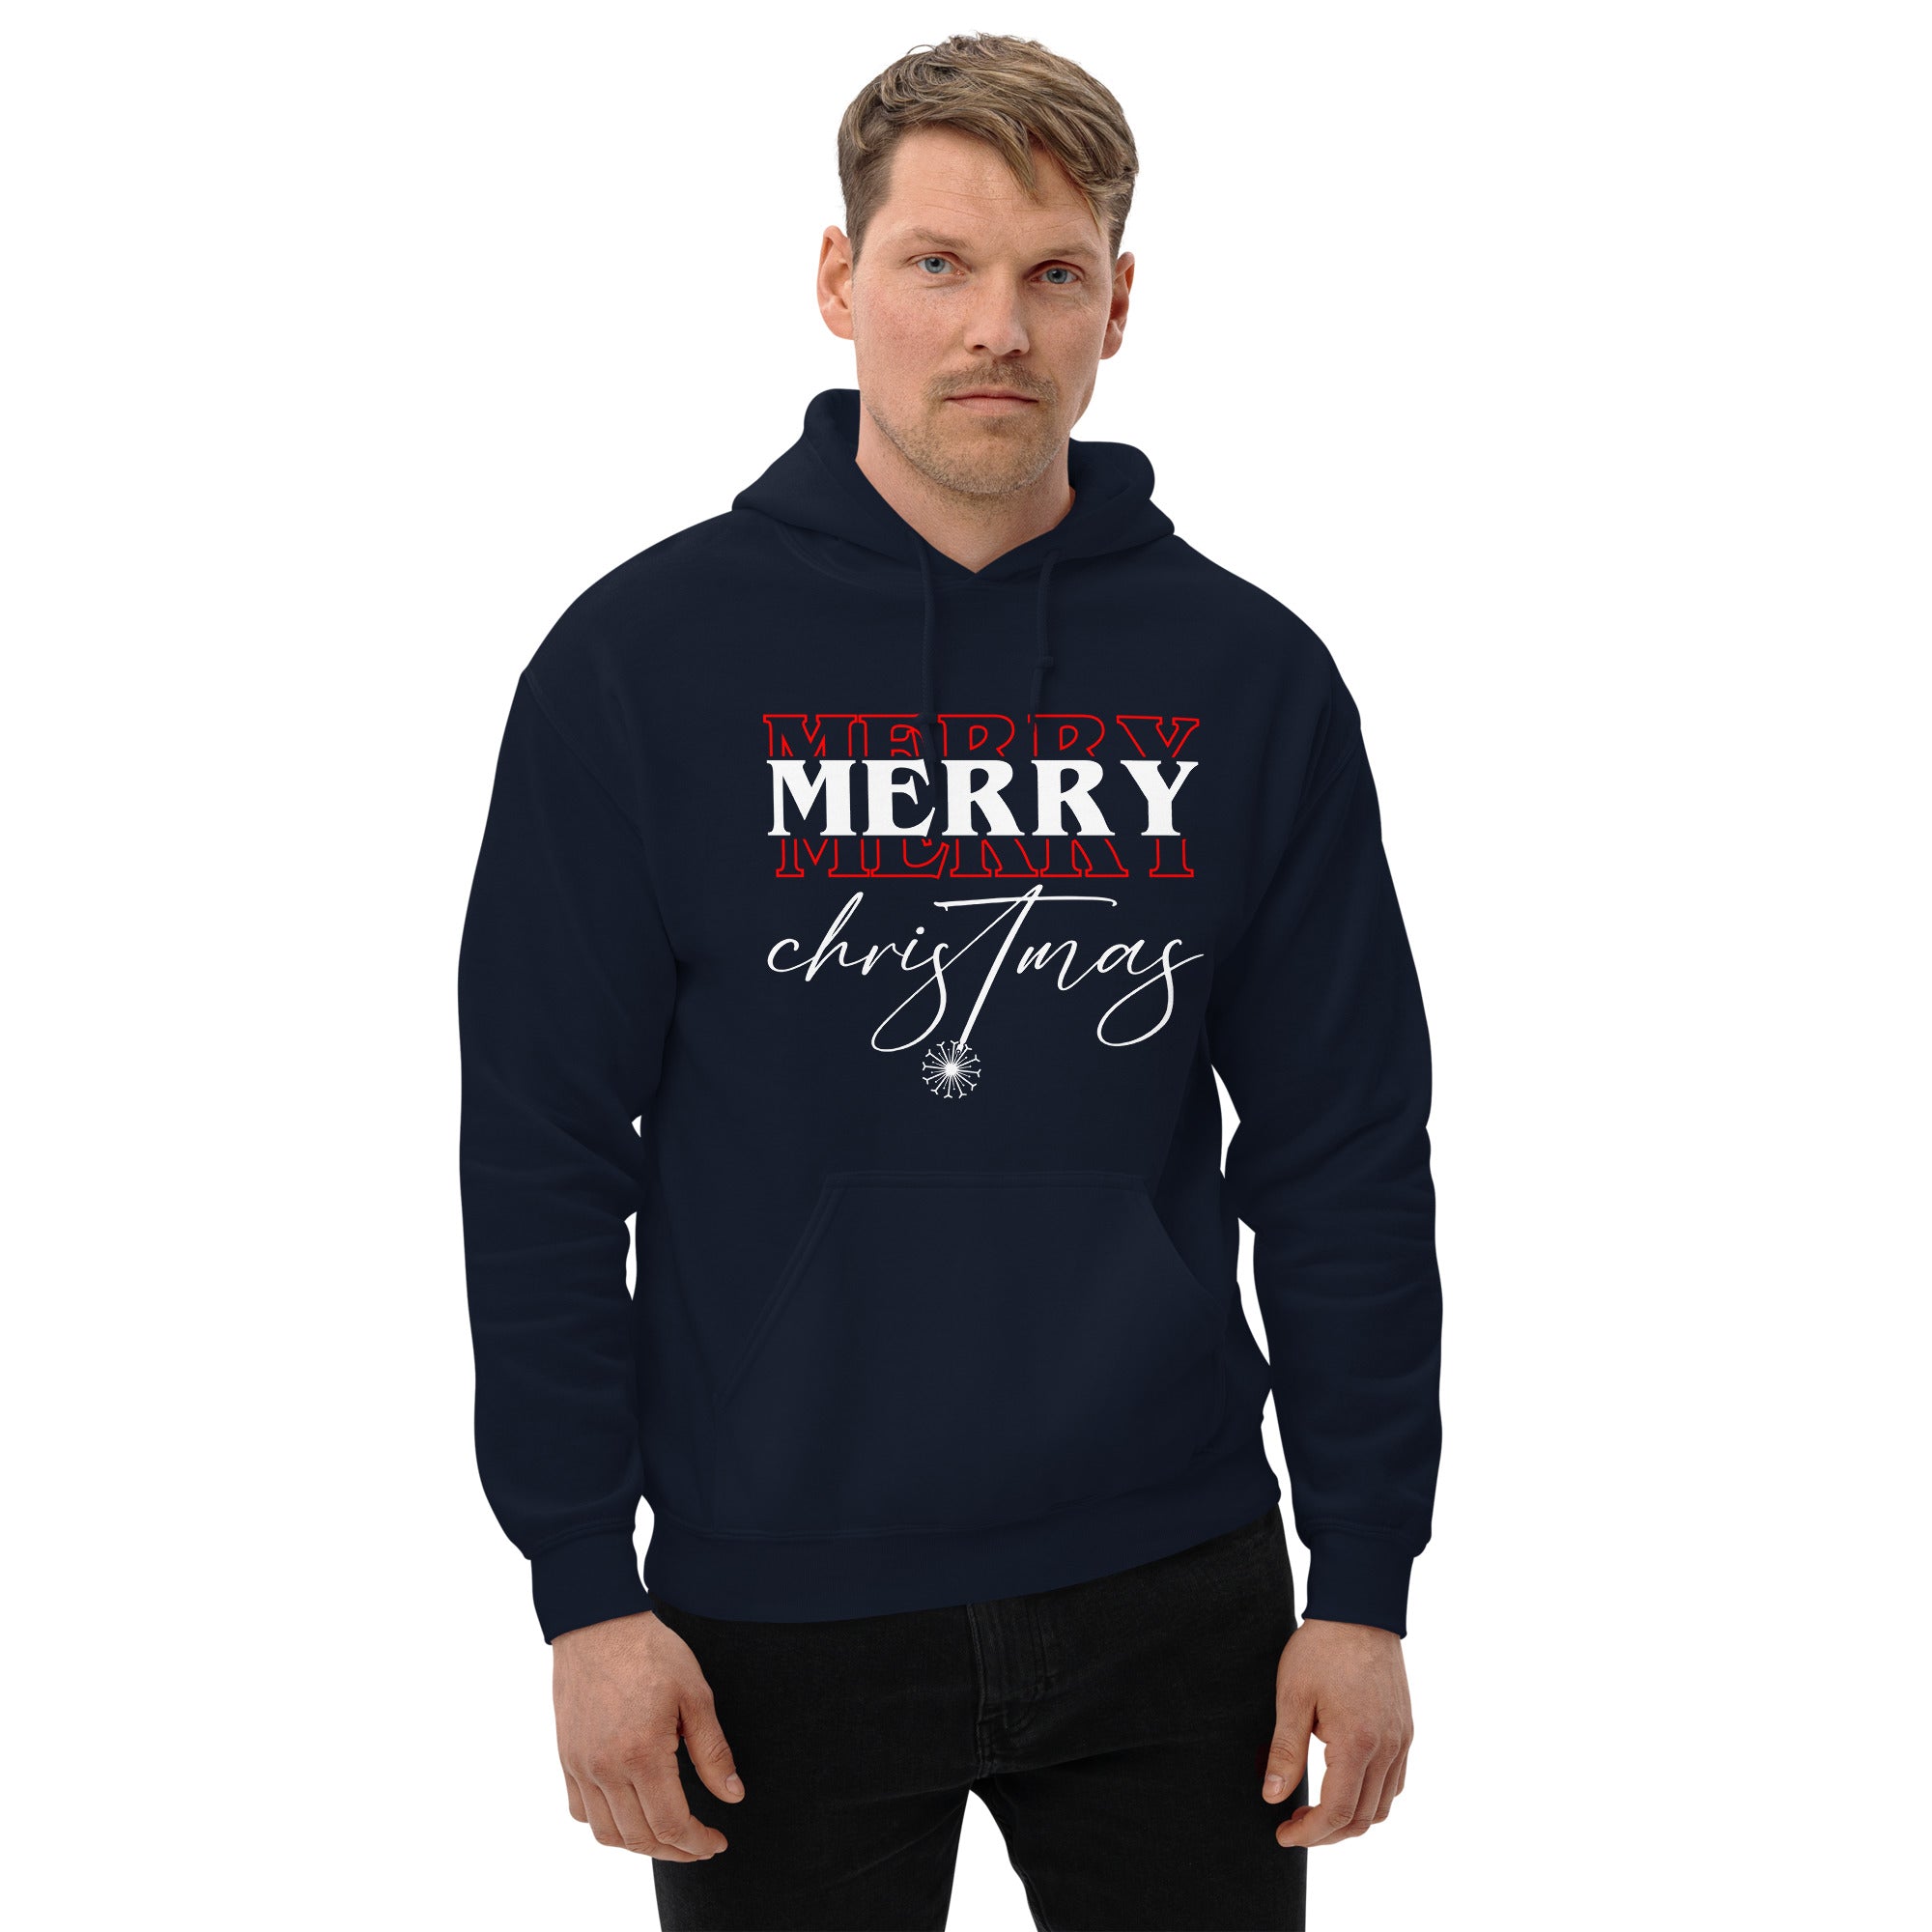 Merry Christmas Xmas Holiday Winter Festive Celebration Party Costume Men's Hoodie